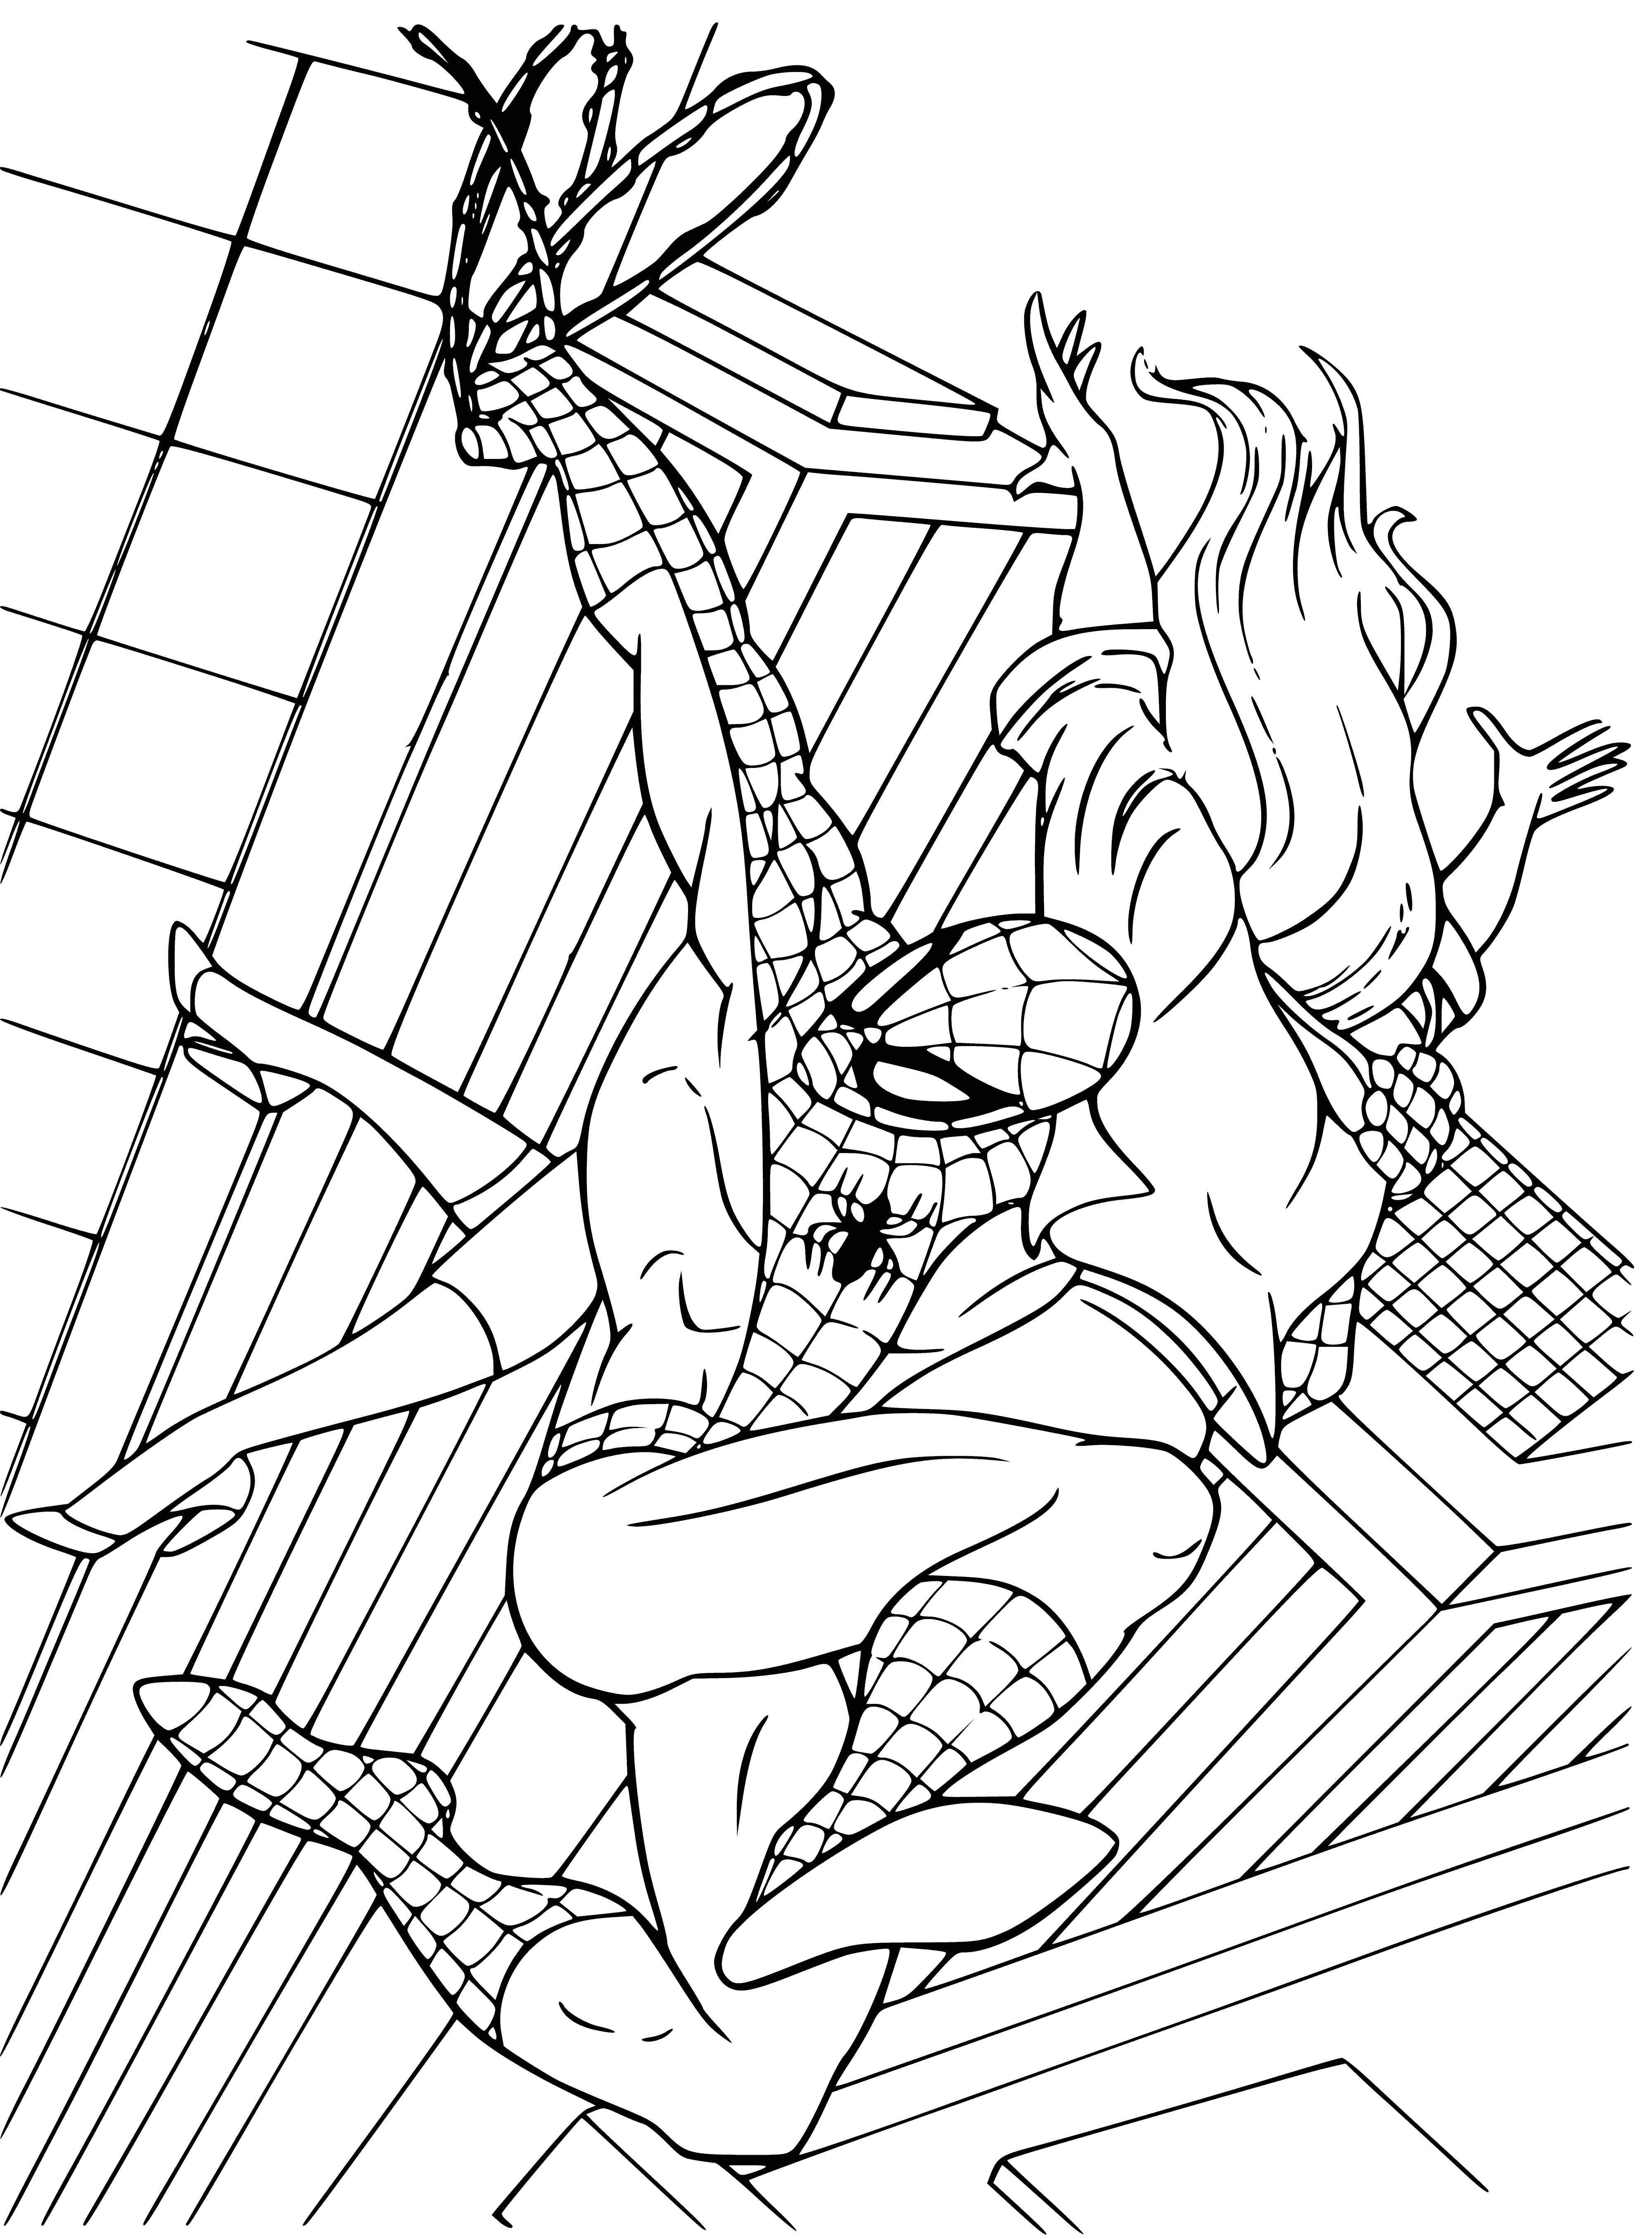 coloring page: Spiderman saves a girl from falling, his gaze fixed on her. His arm firmly supporting her and his other hand clutching the building.